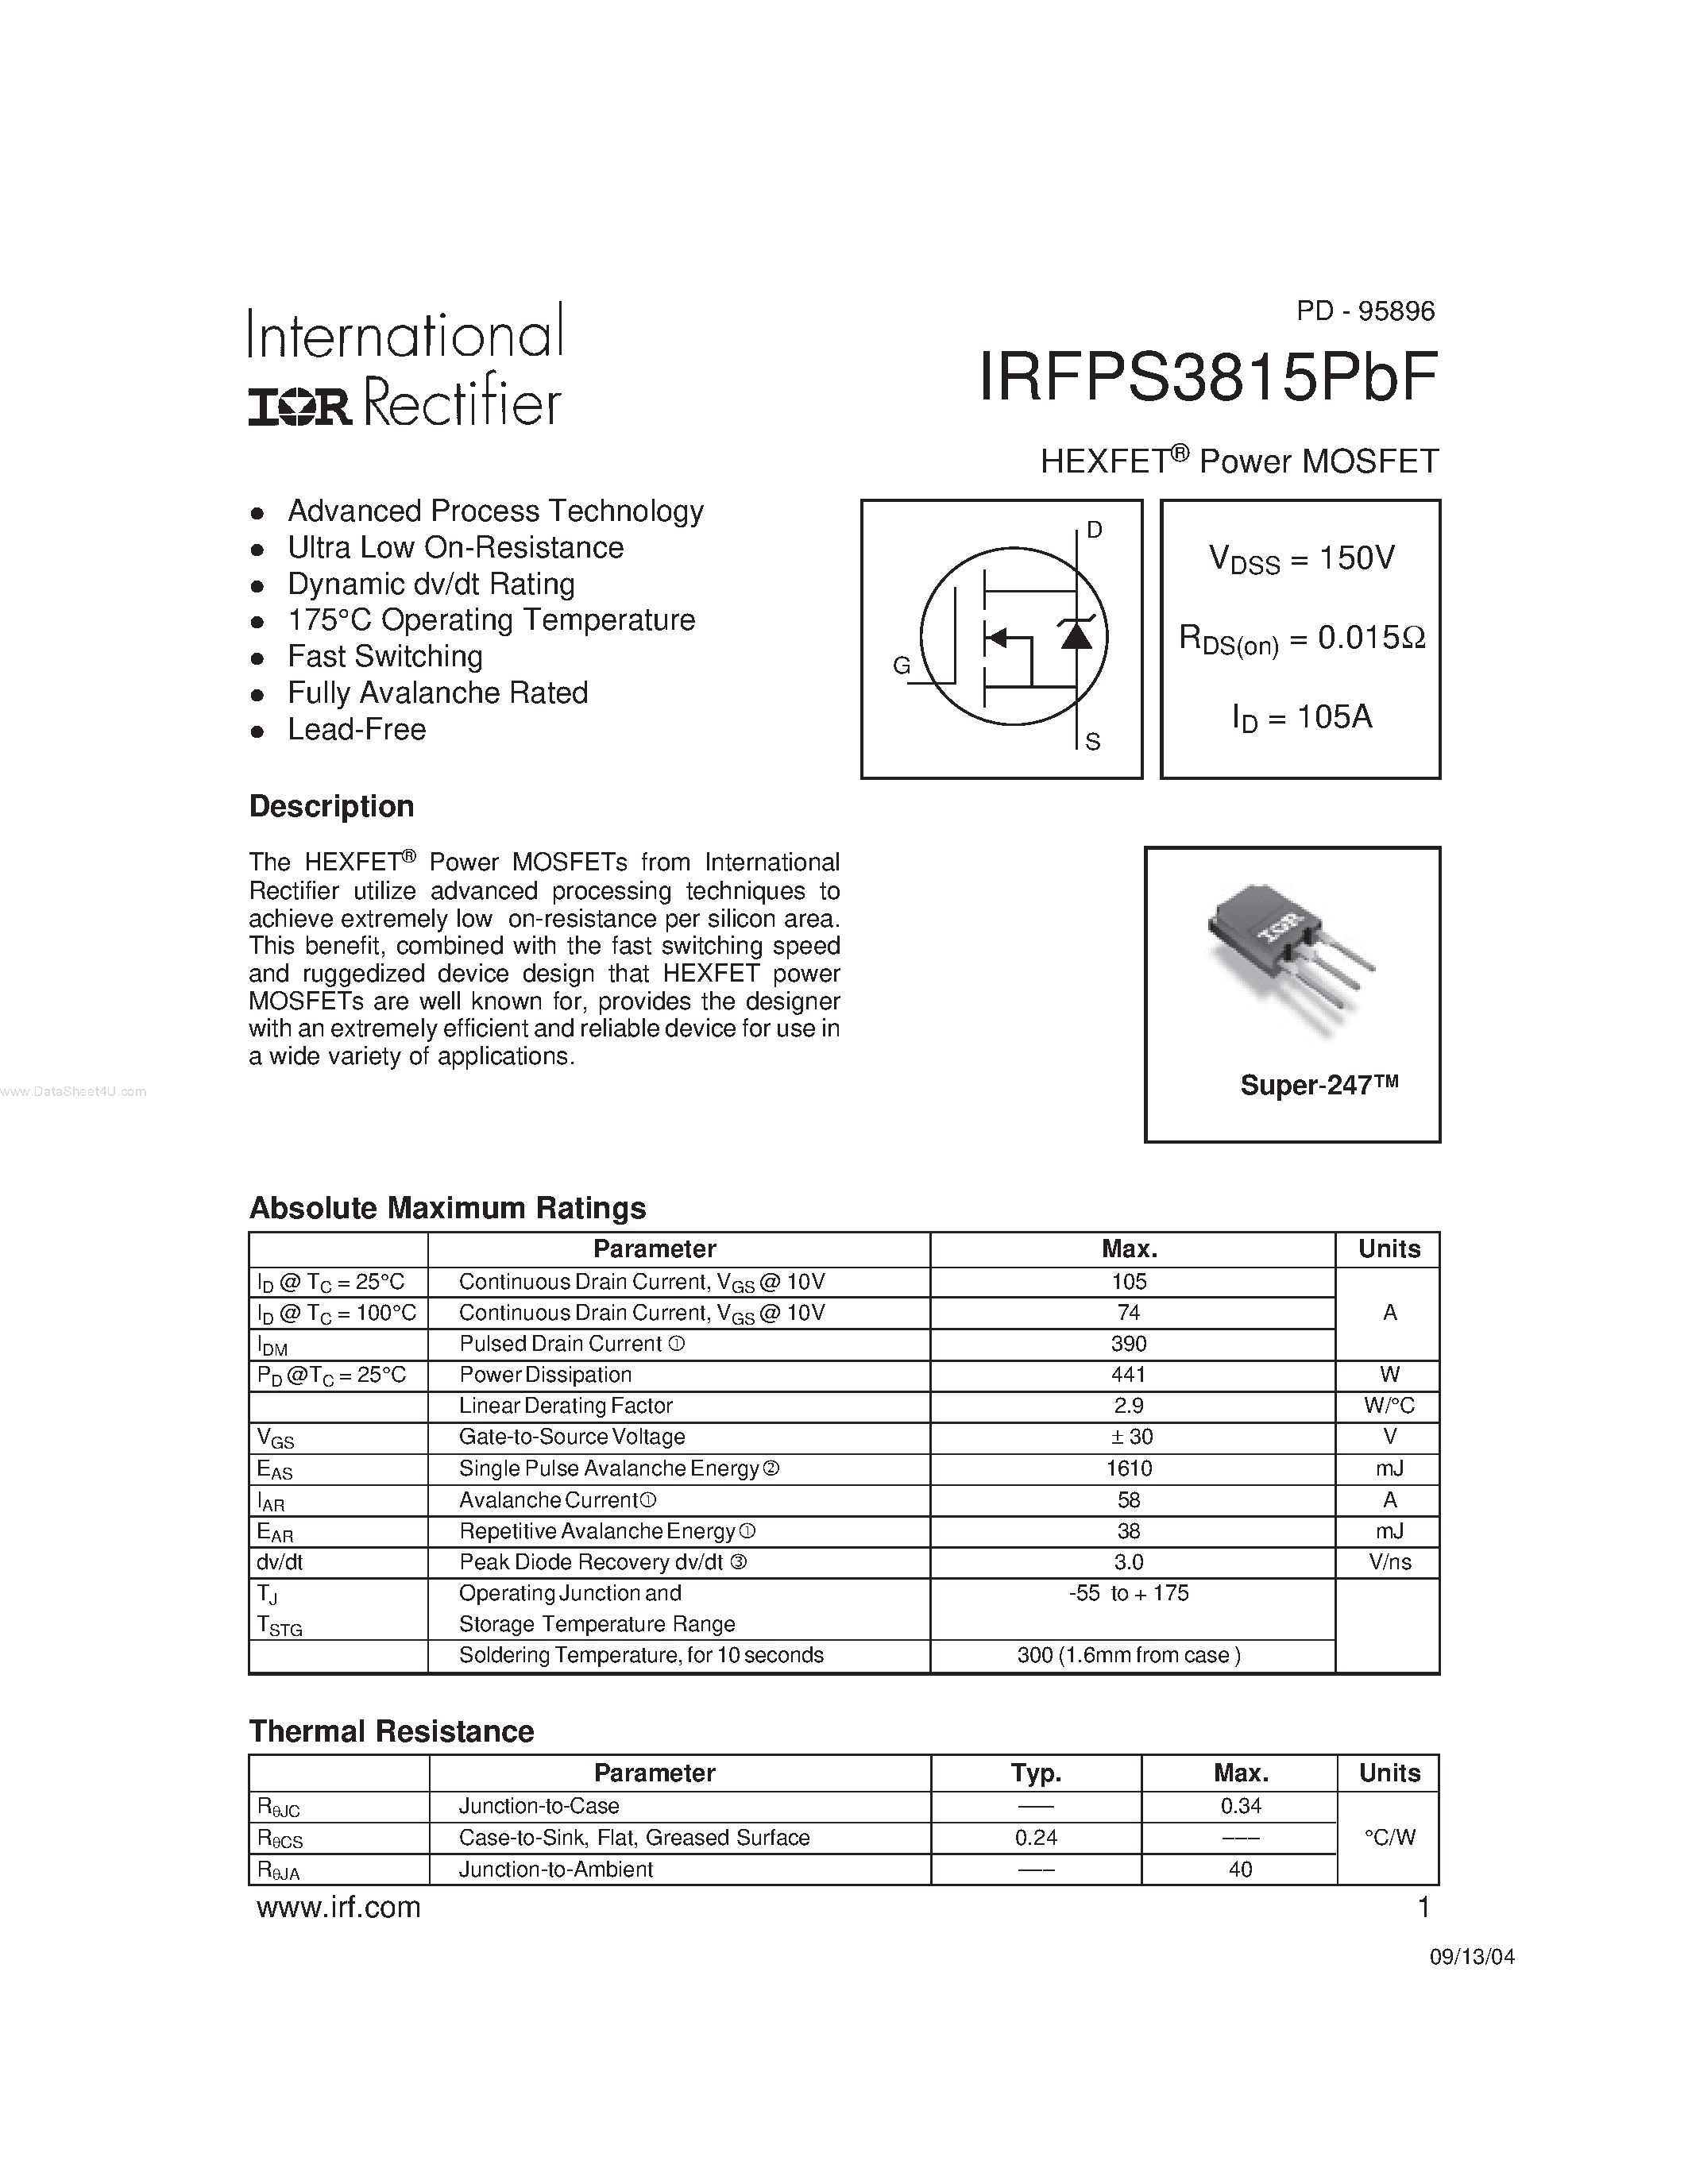 Datasheet IRFPS3815PBF - HEXFET Power MOSFET page 1